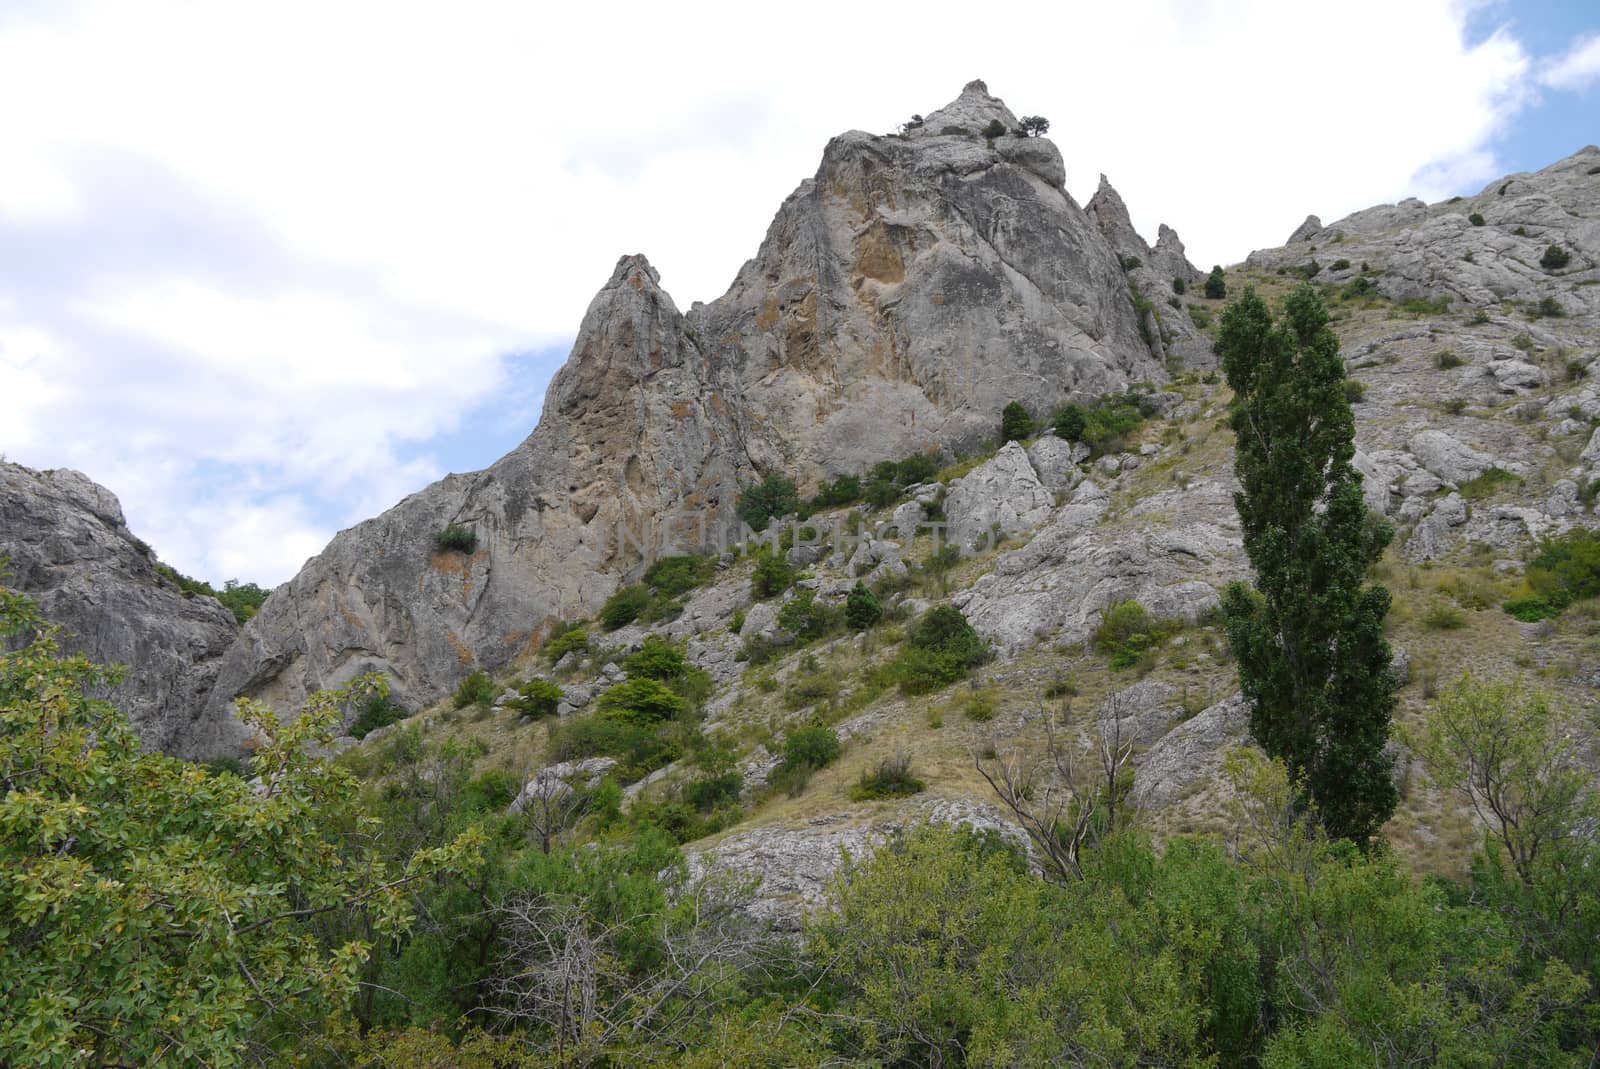 A steep, winding slope with green trees, bushes and huge rocks at the top by Adamchuk